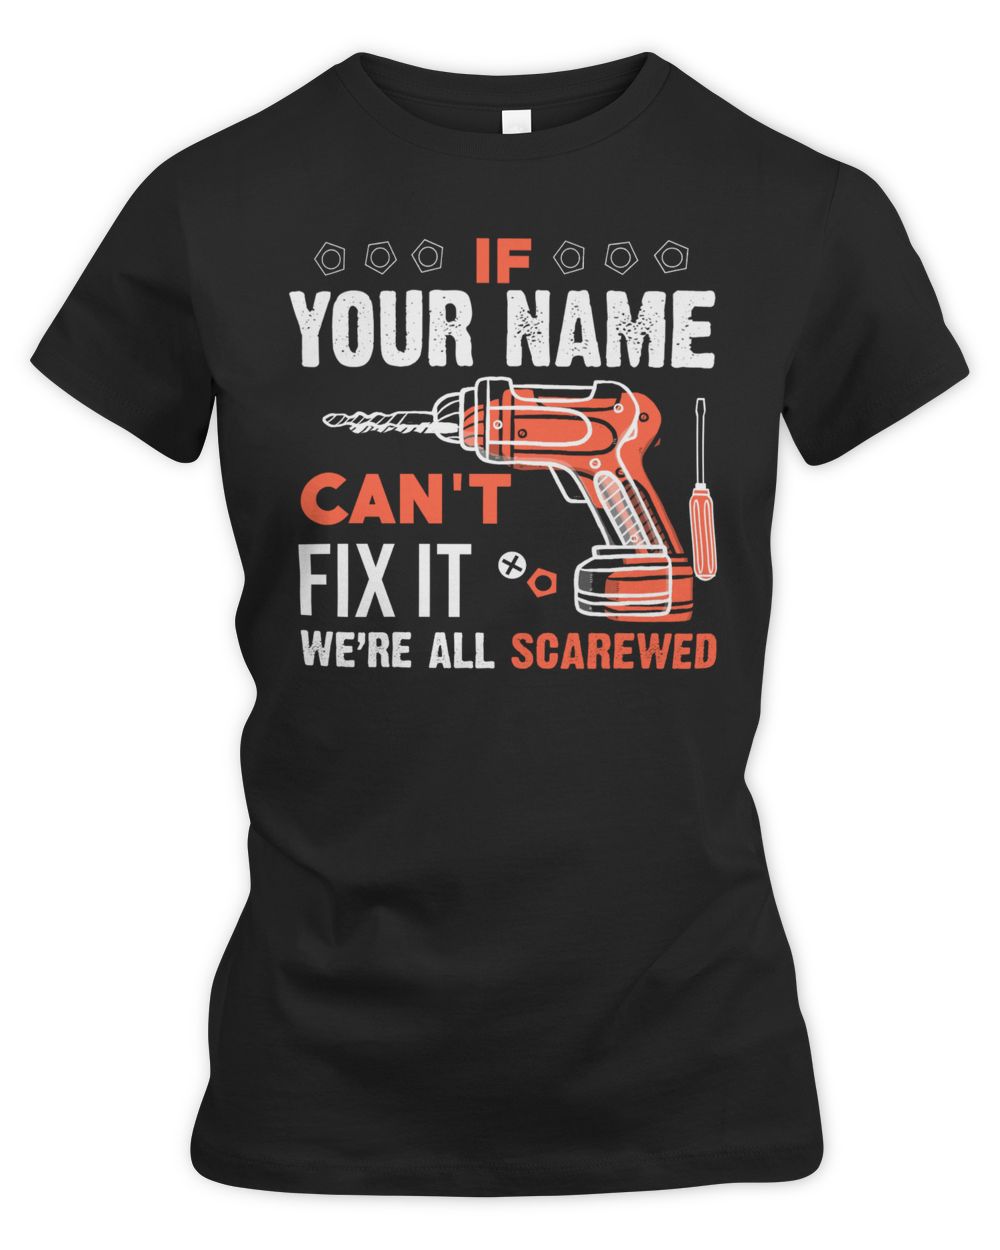 If YOUR NAME Can't Fix It .We're All Scarewed. Design Your Own T-shirt Online Women's Premium Slim Fit Tee black 